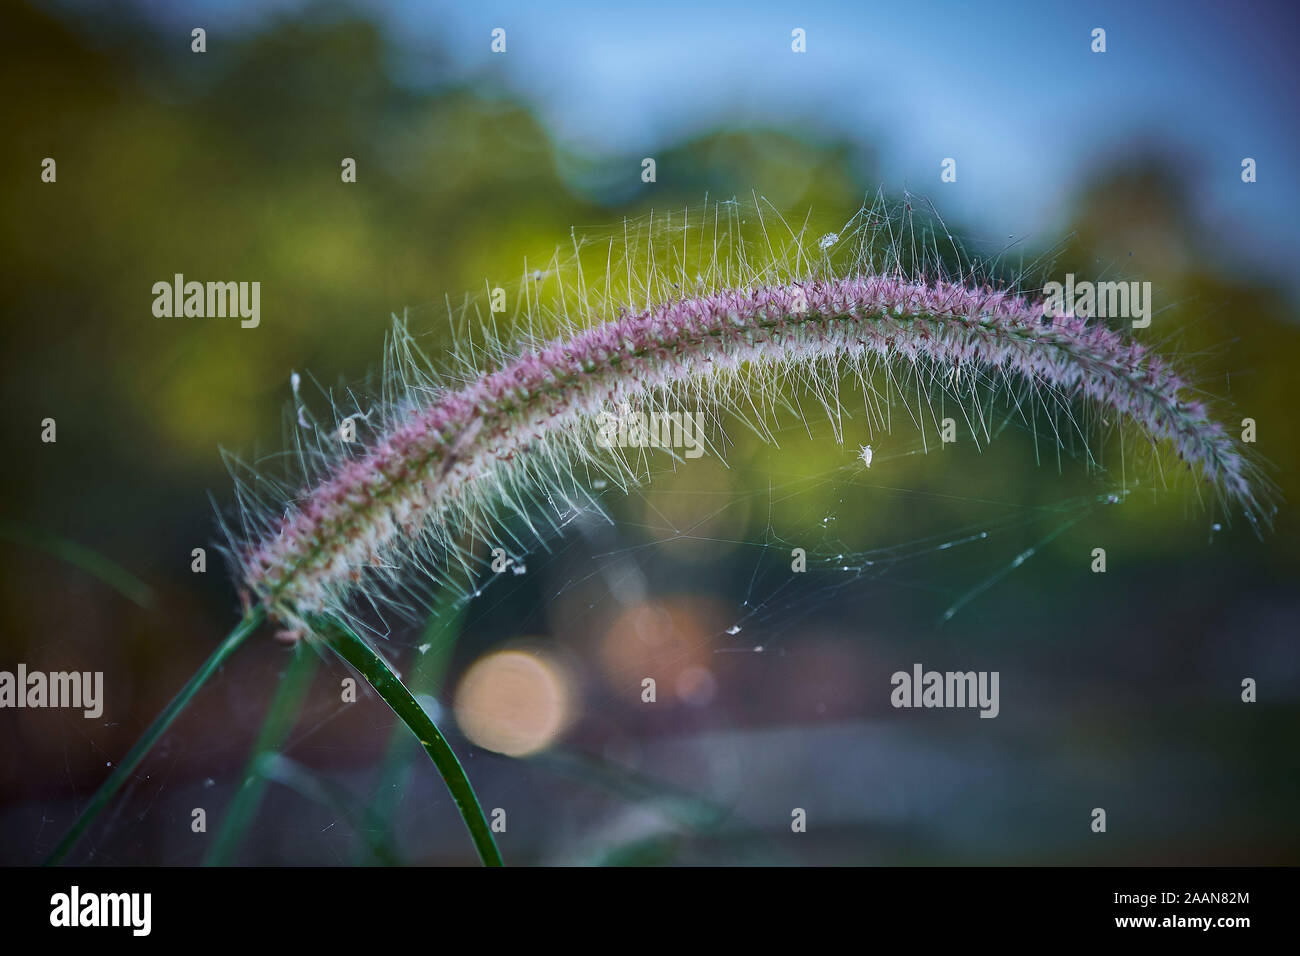 The Knotroot foxtail, slender pigeongrass, grass flowers in the morning, relaxing moments. Stock Photo